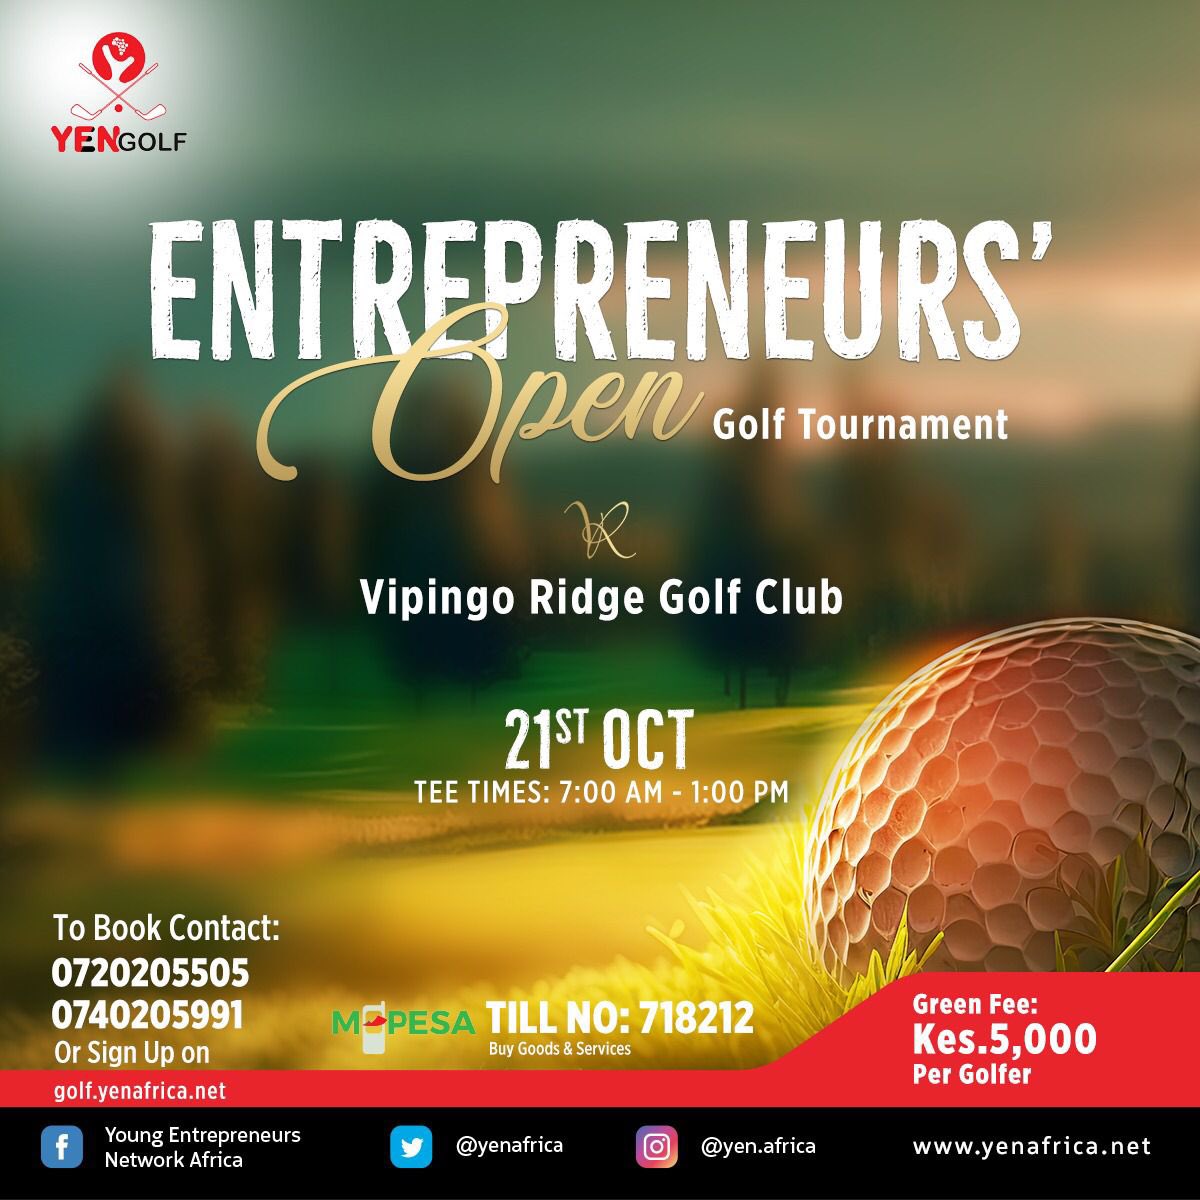 Will you heed the @VipingoRidge call? We have packages for flights & accommodation.

To partner or for enquiries, call us on 0740 205 991

#VipingoRidge #YENGolf #EntrepreneursOpen #YENGolfTournament #GolfTournament #GolfGame